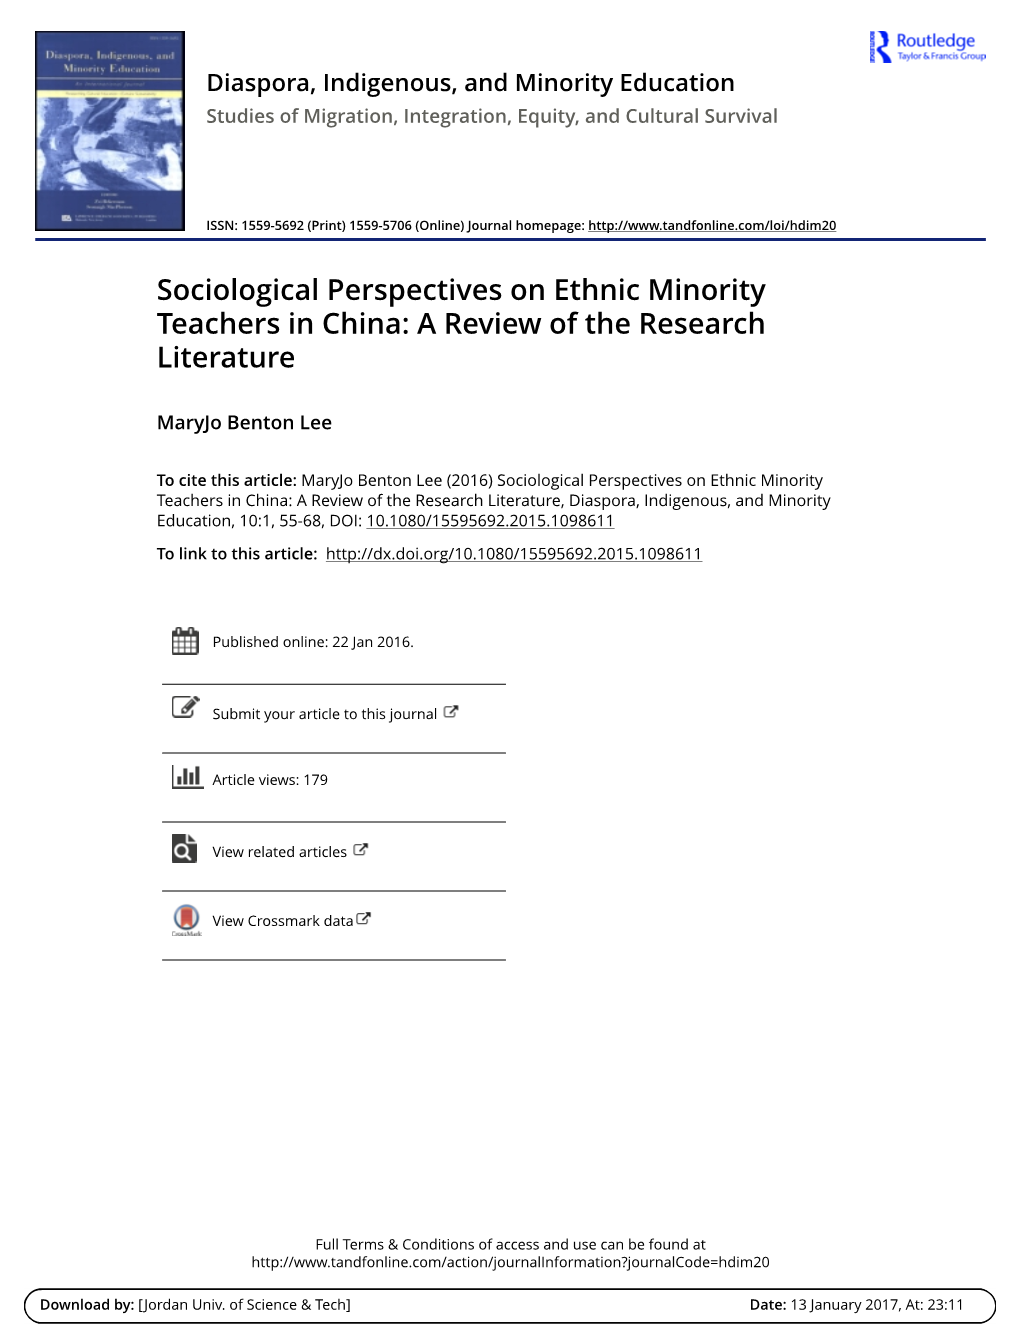 Sociological Perspectives on Ethnic Minority Teachers in China: a Review of the Research Literature